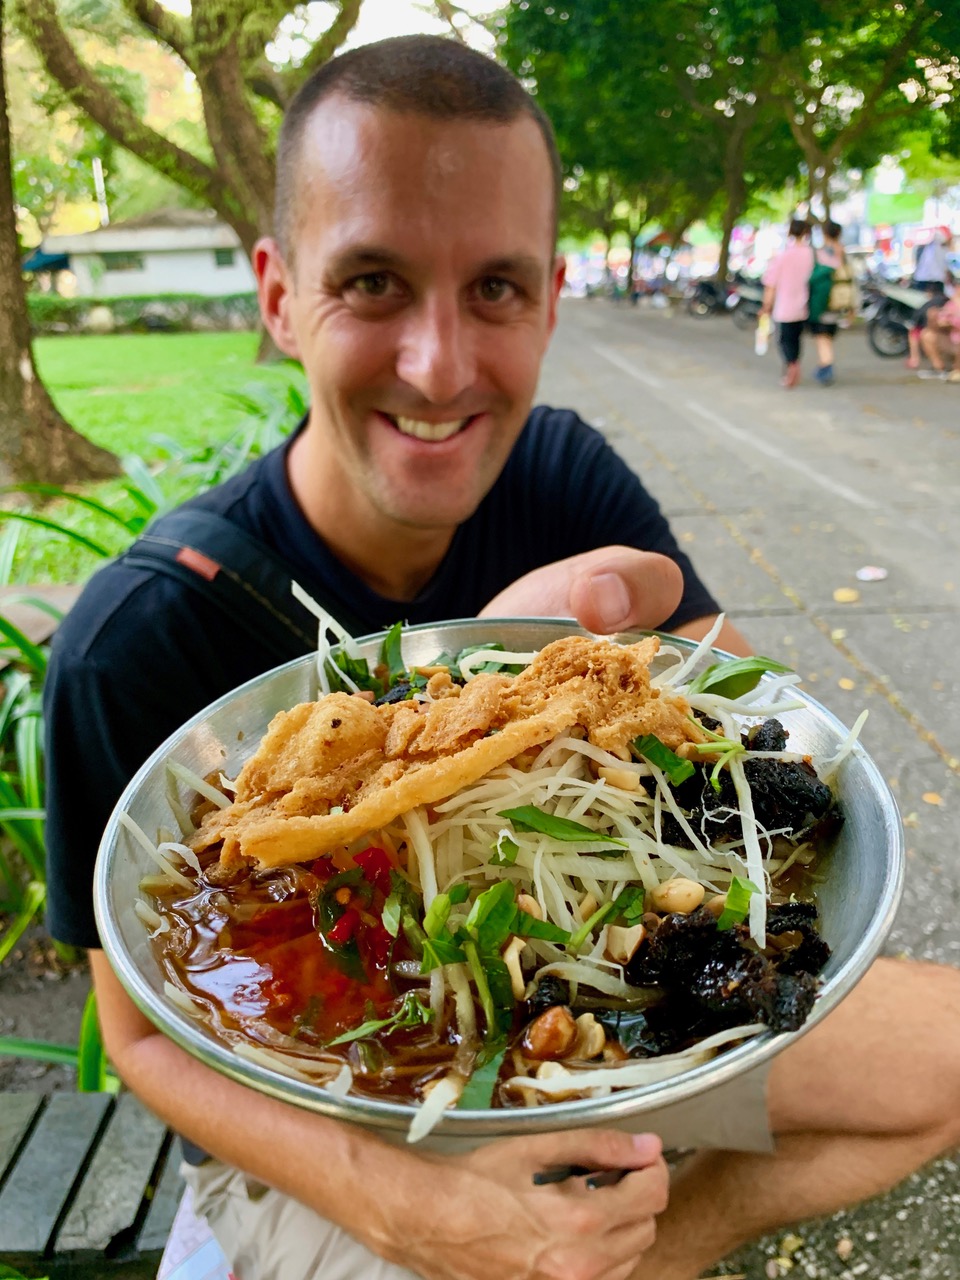 In this photo provided to Tuoi Tre News, Thomas Southam is posing with his dish of 'goi du du kho bo' (green papaya salad topped with dried beef organ) at a park in Ho Chi Minh City.